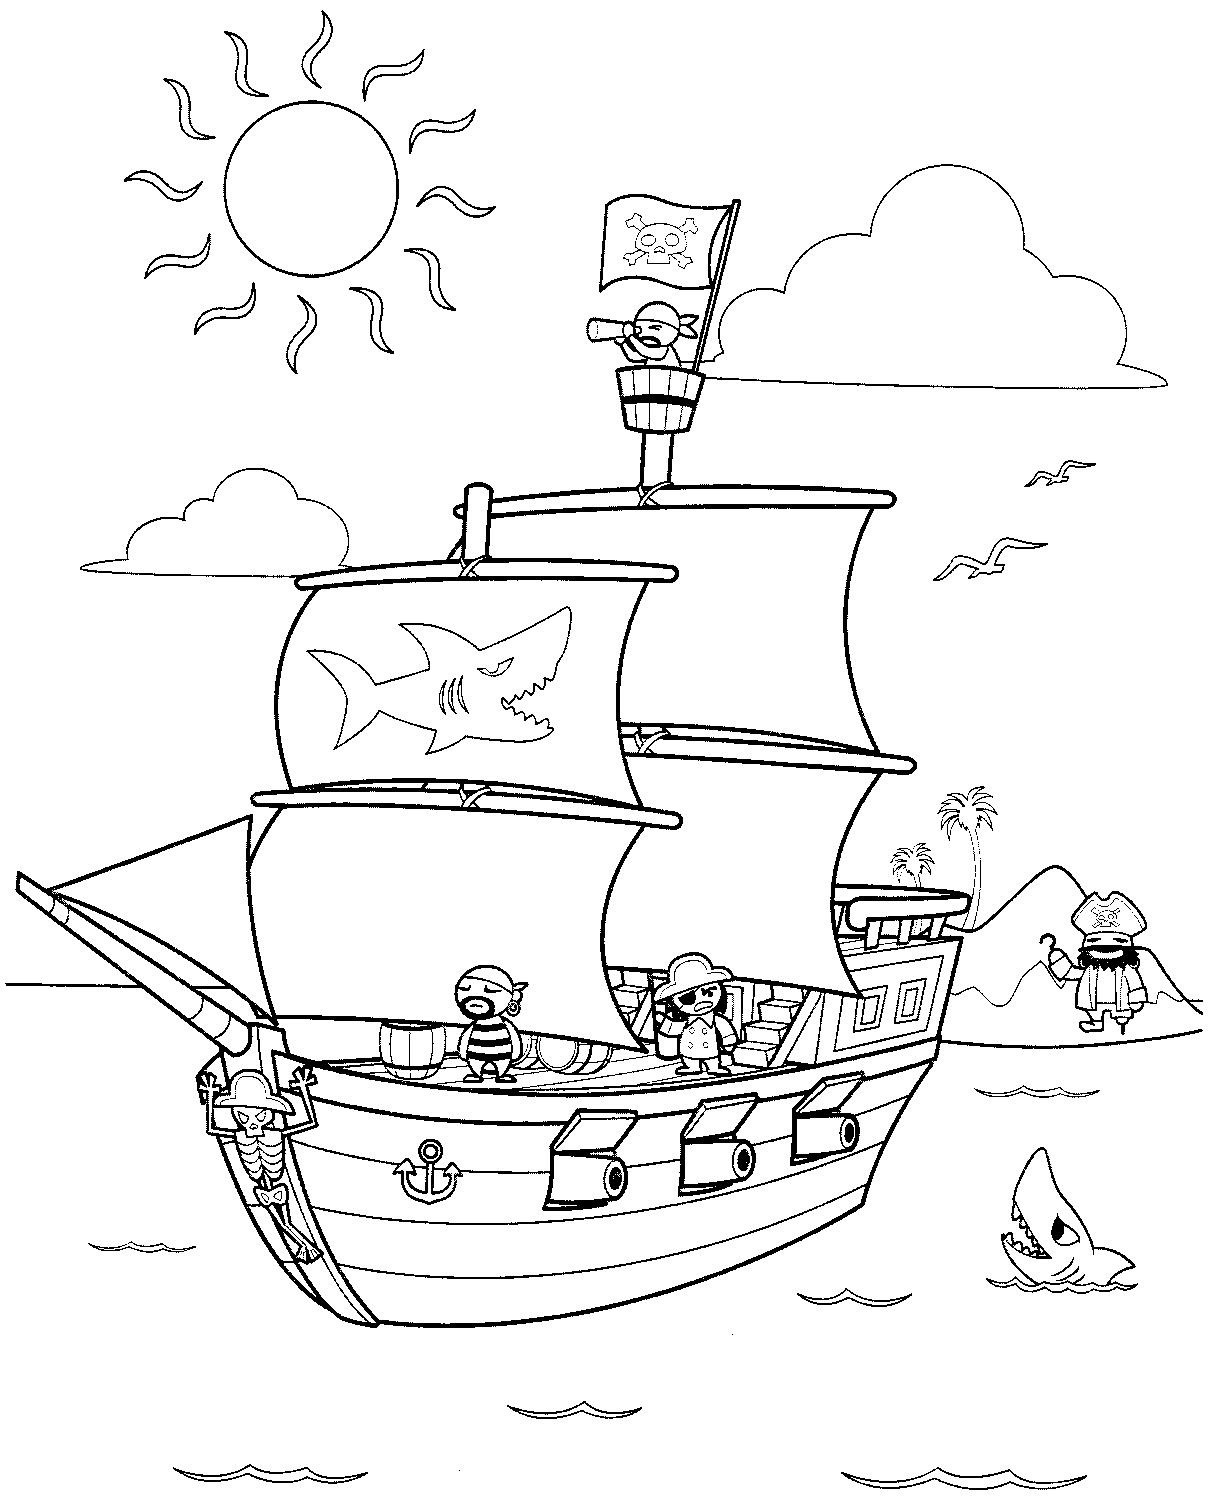  Pirate Ship Coloring Pages for Kids | Print Coloring Pages